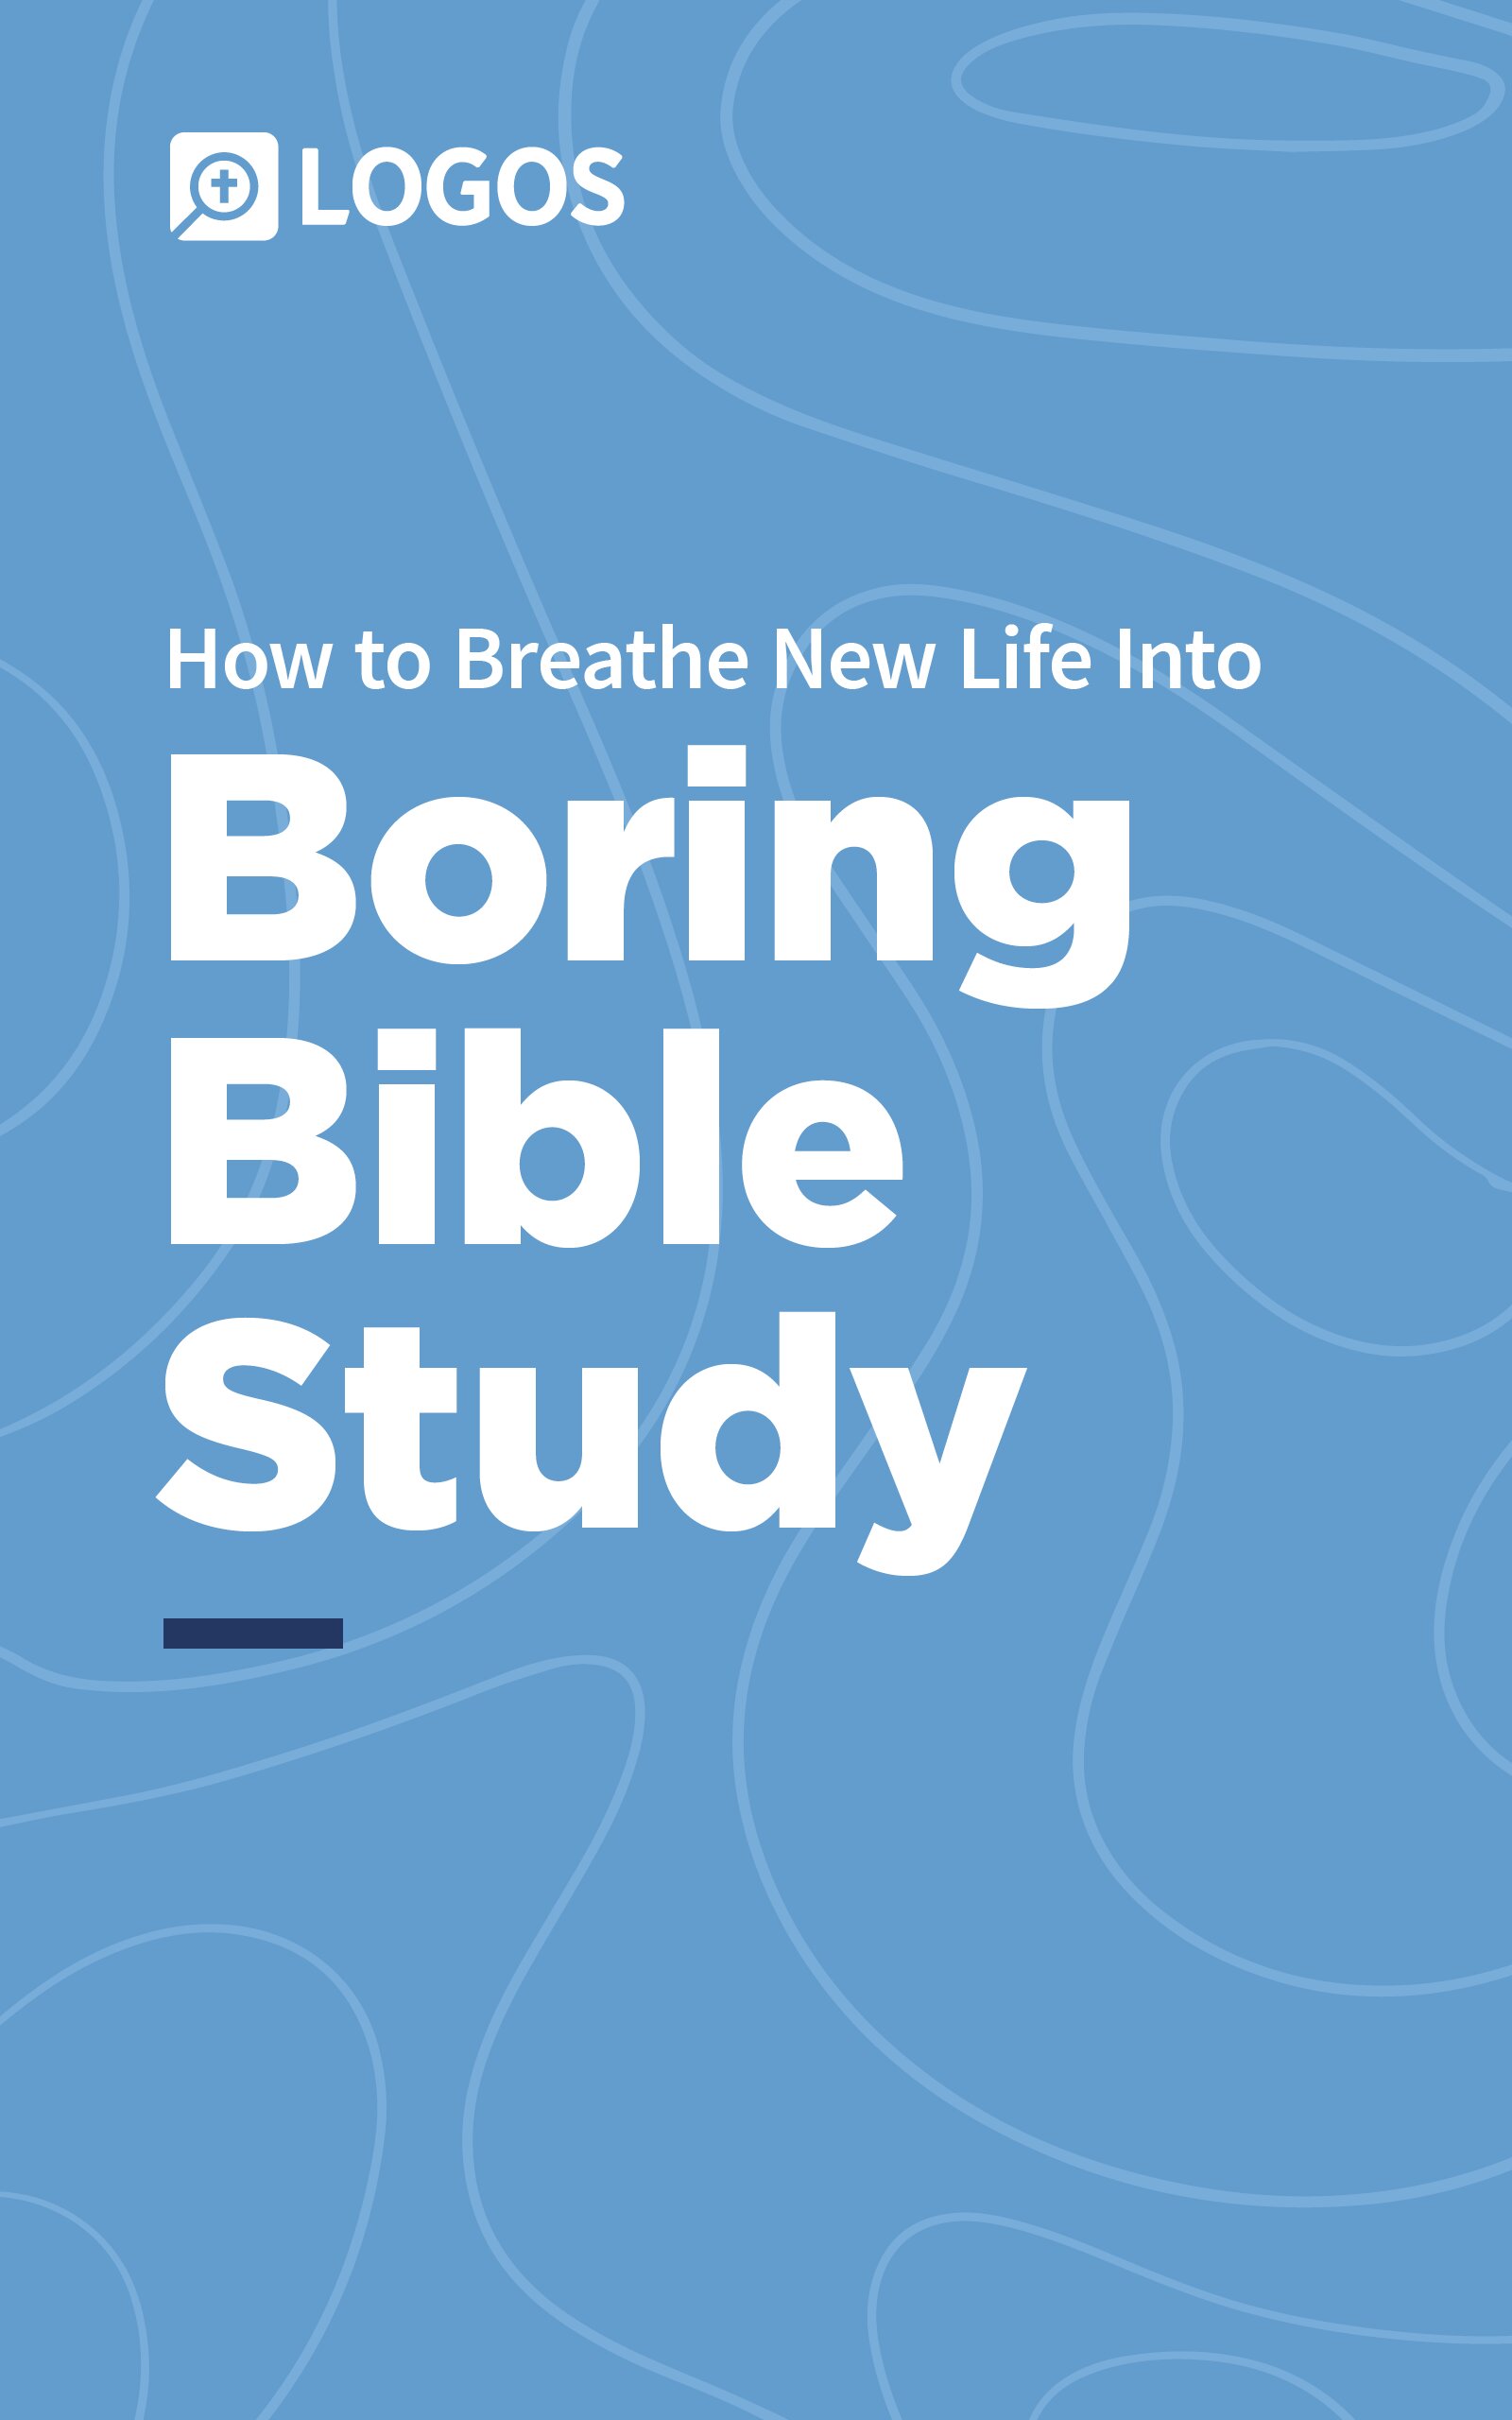 The cover image of the downloadable content. It has the Logos Bible Software logo in the top corner and in bigger text says 'How to breathe new life into boring Bible study.'